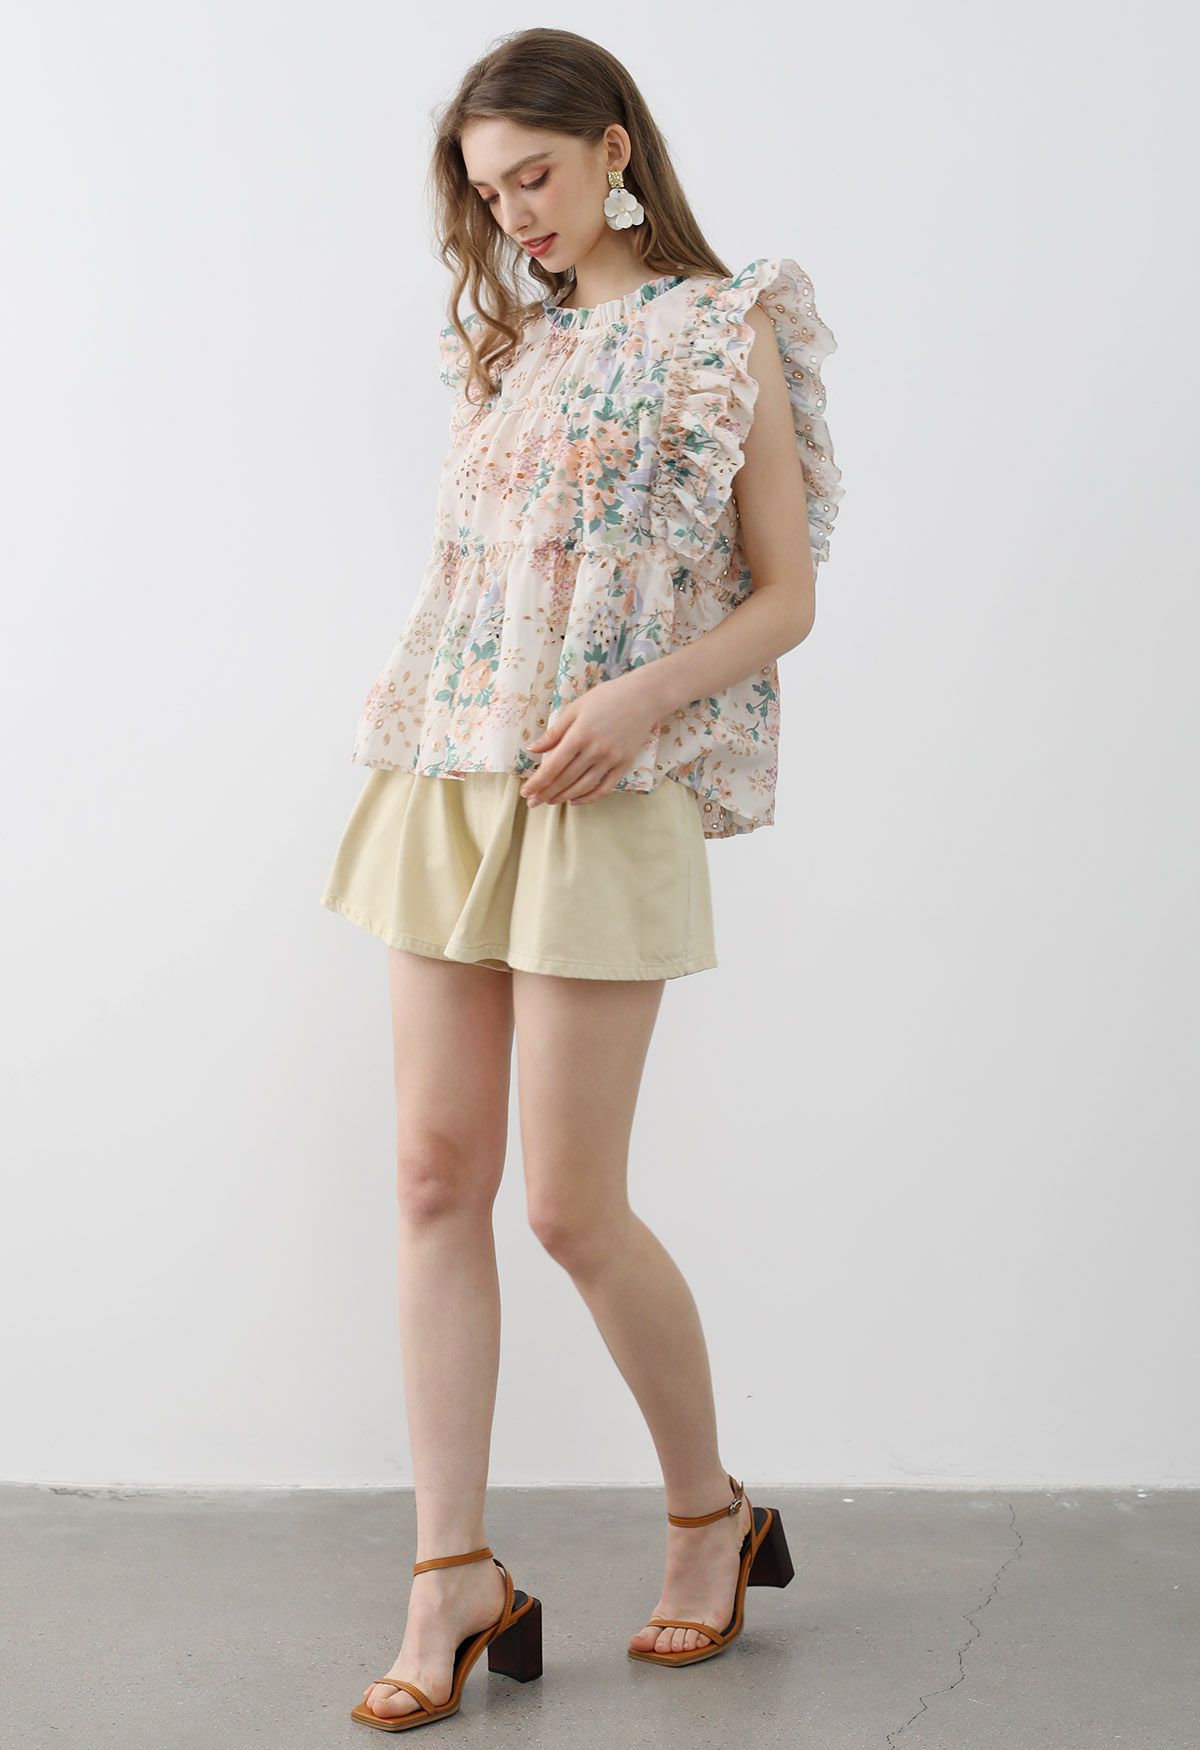 Metallic Embroidered Floral Print Sleeveless Dolly Top